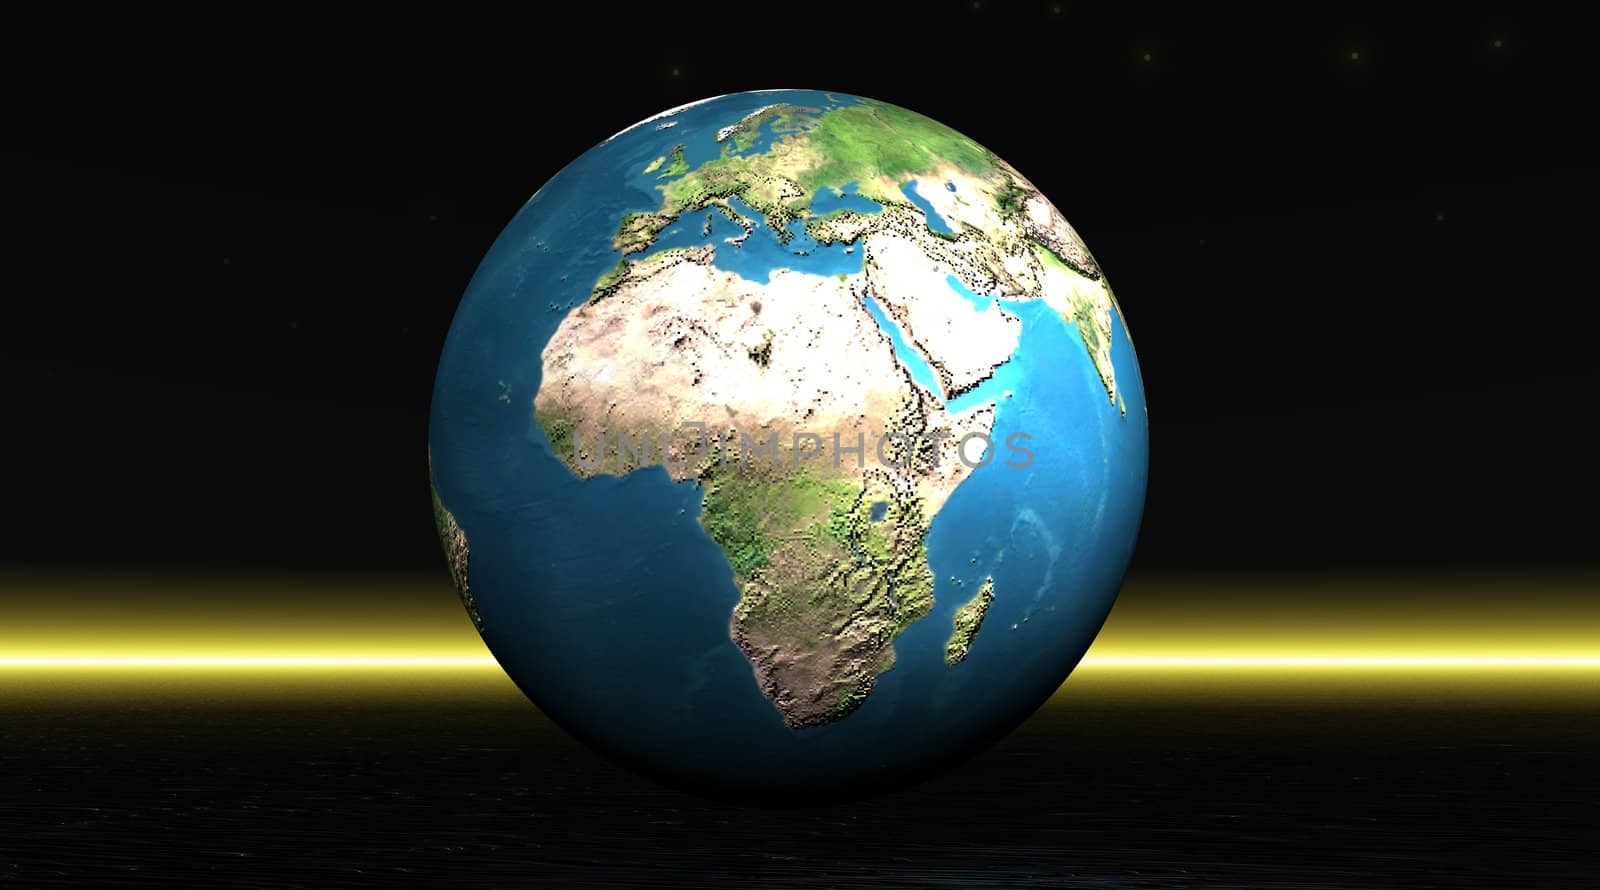 Earth planet with Africa and Europe continents in a black background with a yellow horizontal ray